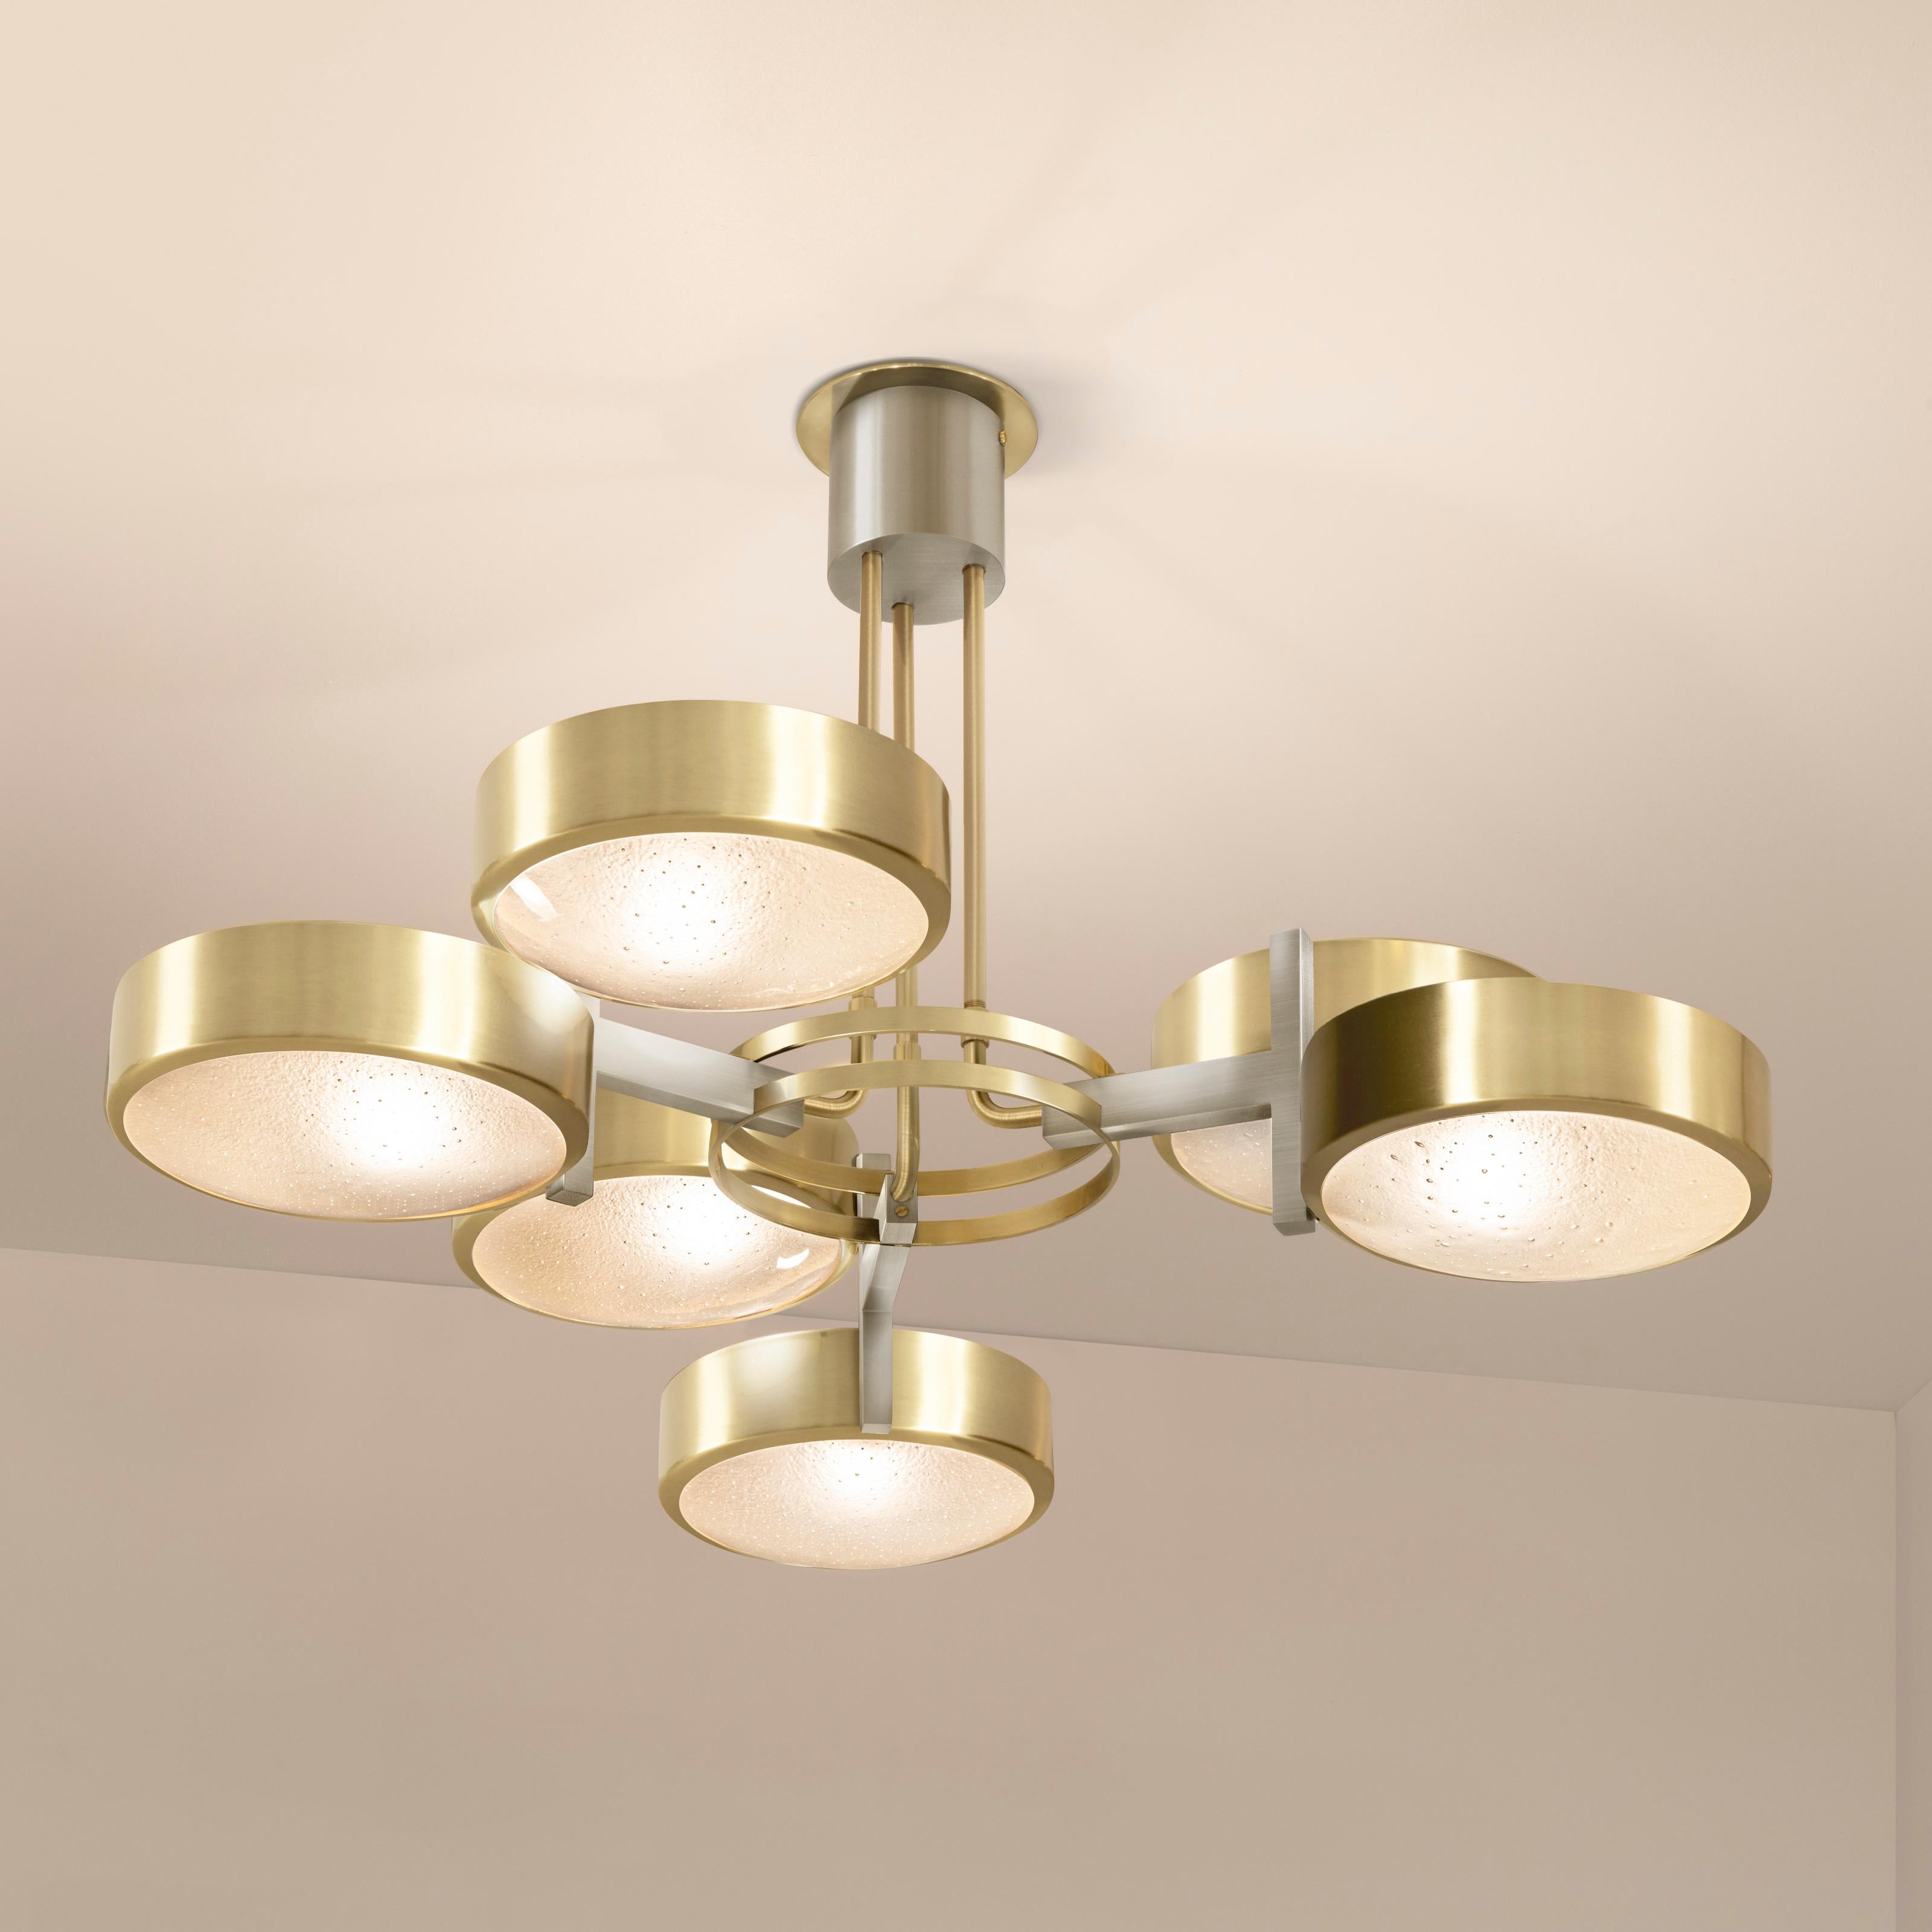 Modern Eclissi Ceiling Light by Gaspare Asaro- Satin Brass and Satin Nickel Finish For Sale